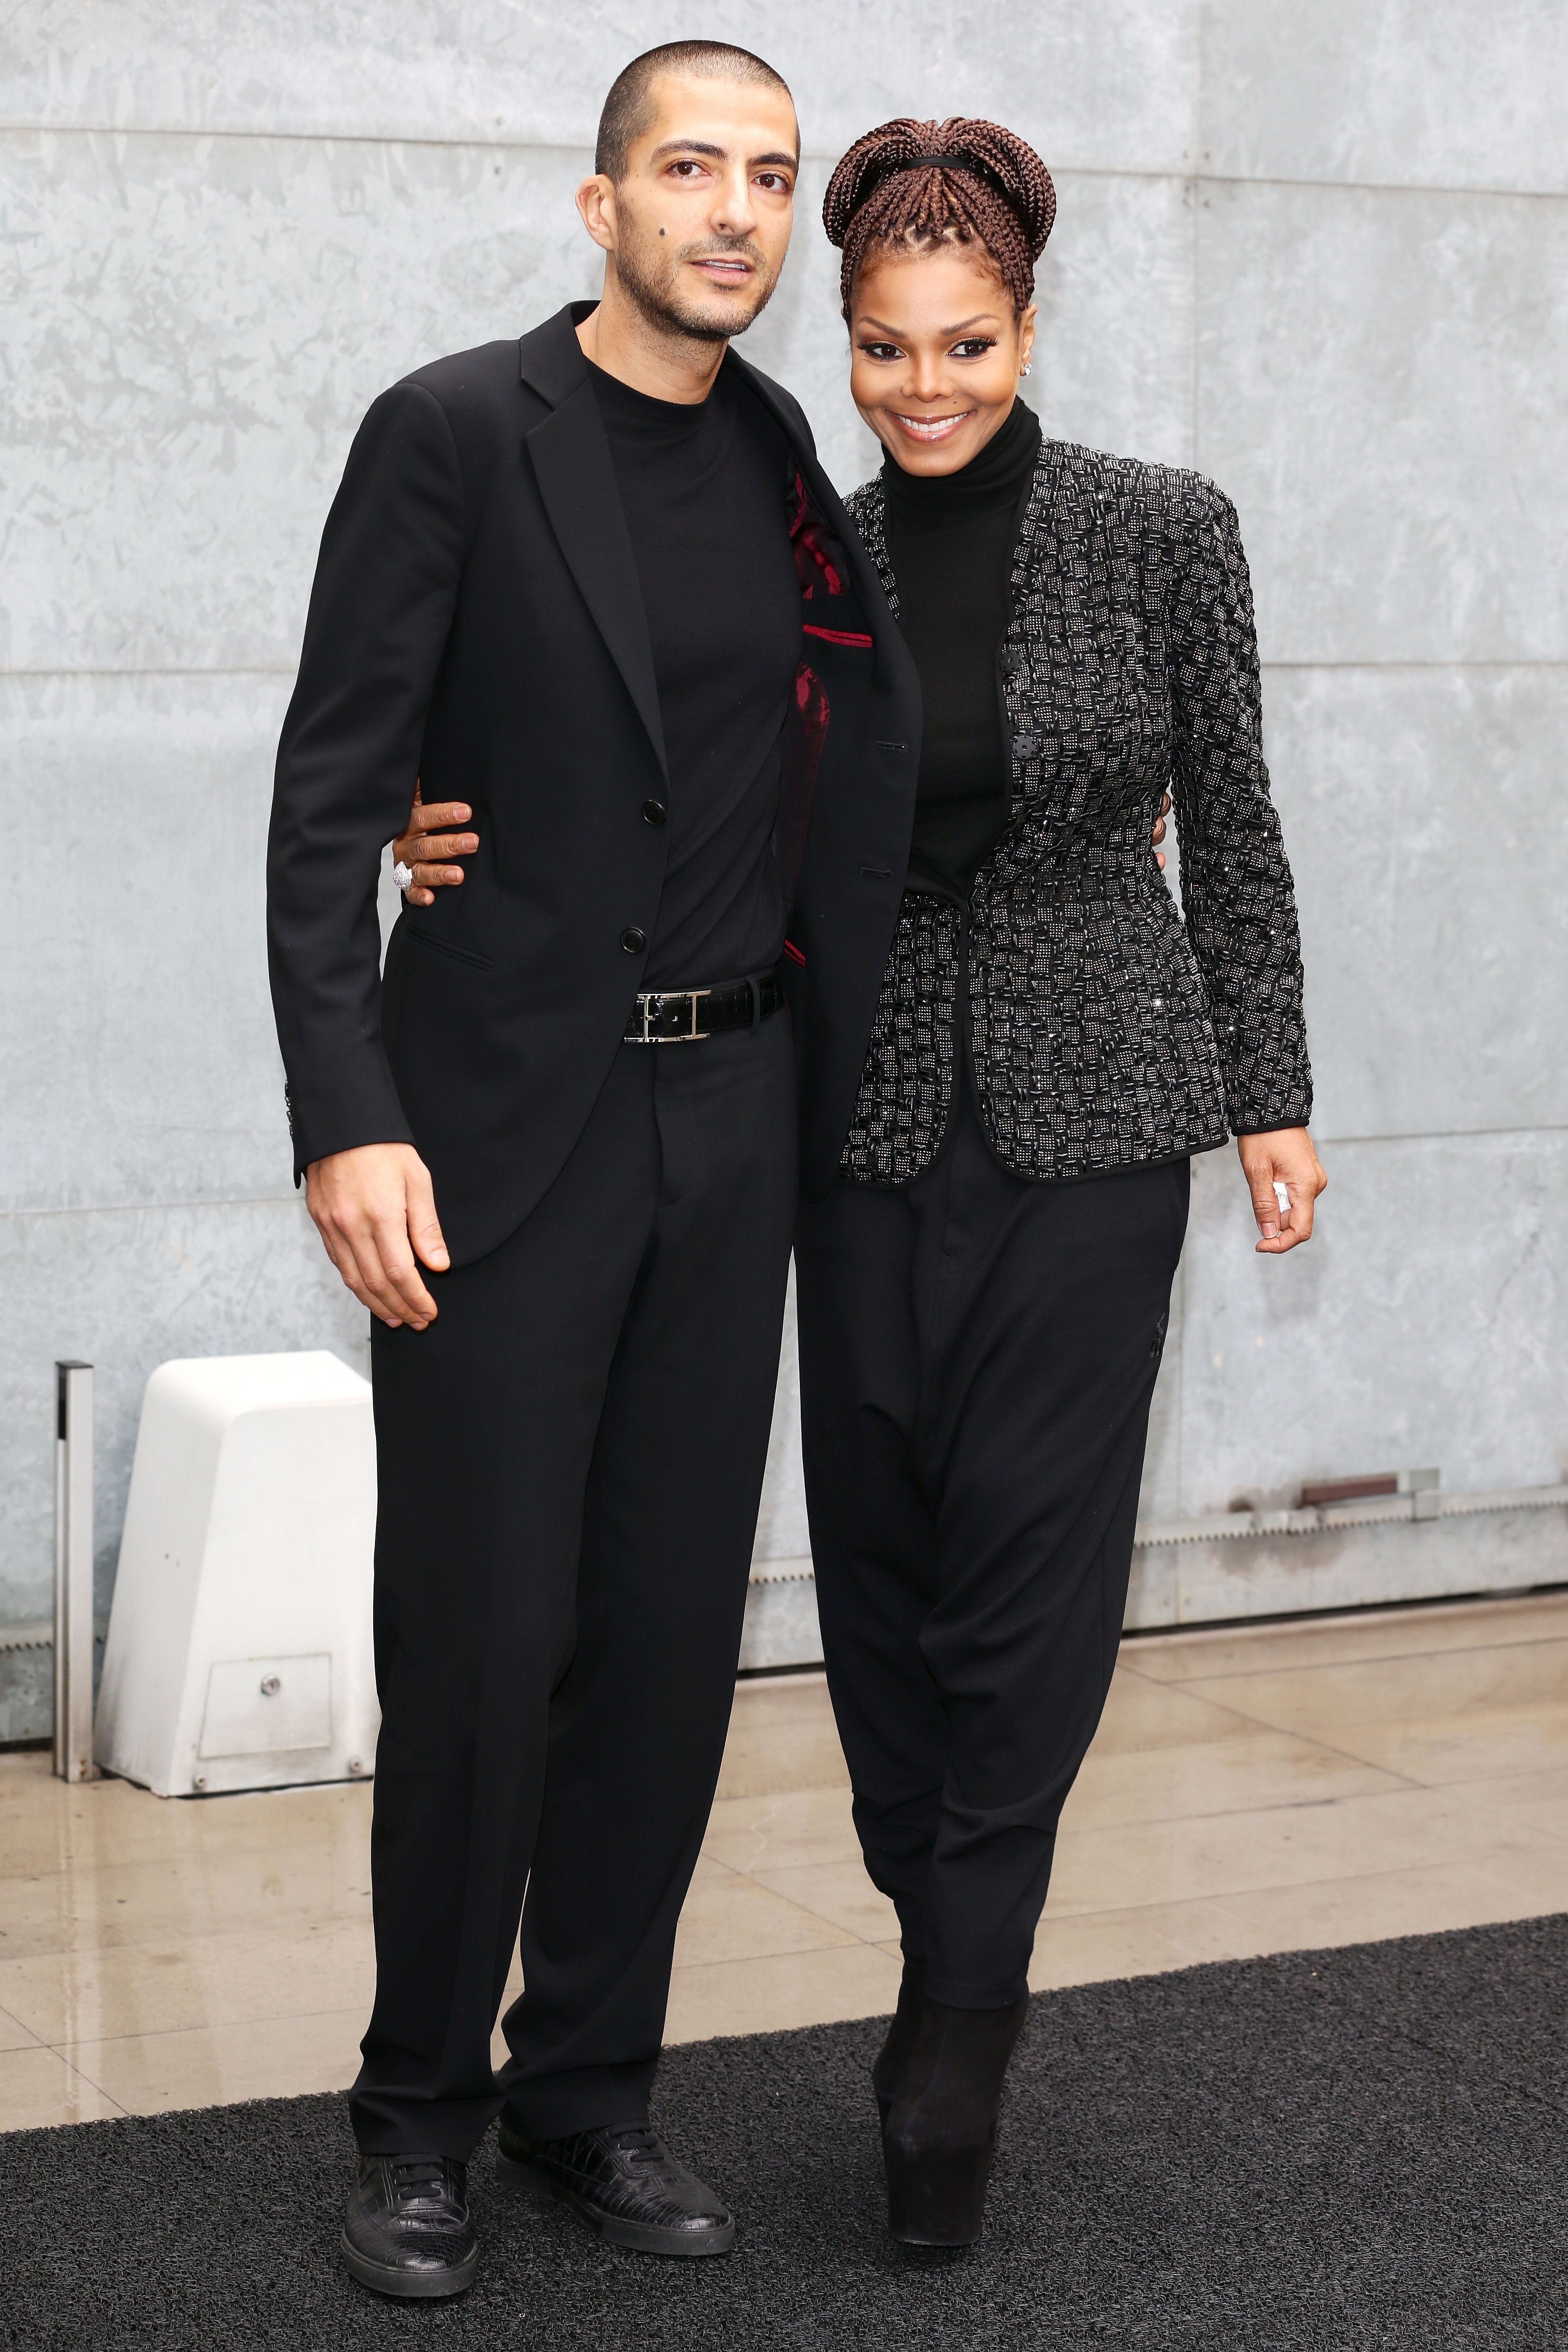 Wissam al Mana and Janet Jackson during the Giorgio Armani fashion show during Milan Fashion Week Womenswear Fall/Winter 2013/14 on February 25, 2013, in Milan, Italy. | Source: Getty Images